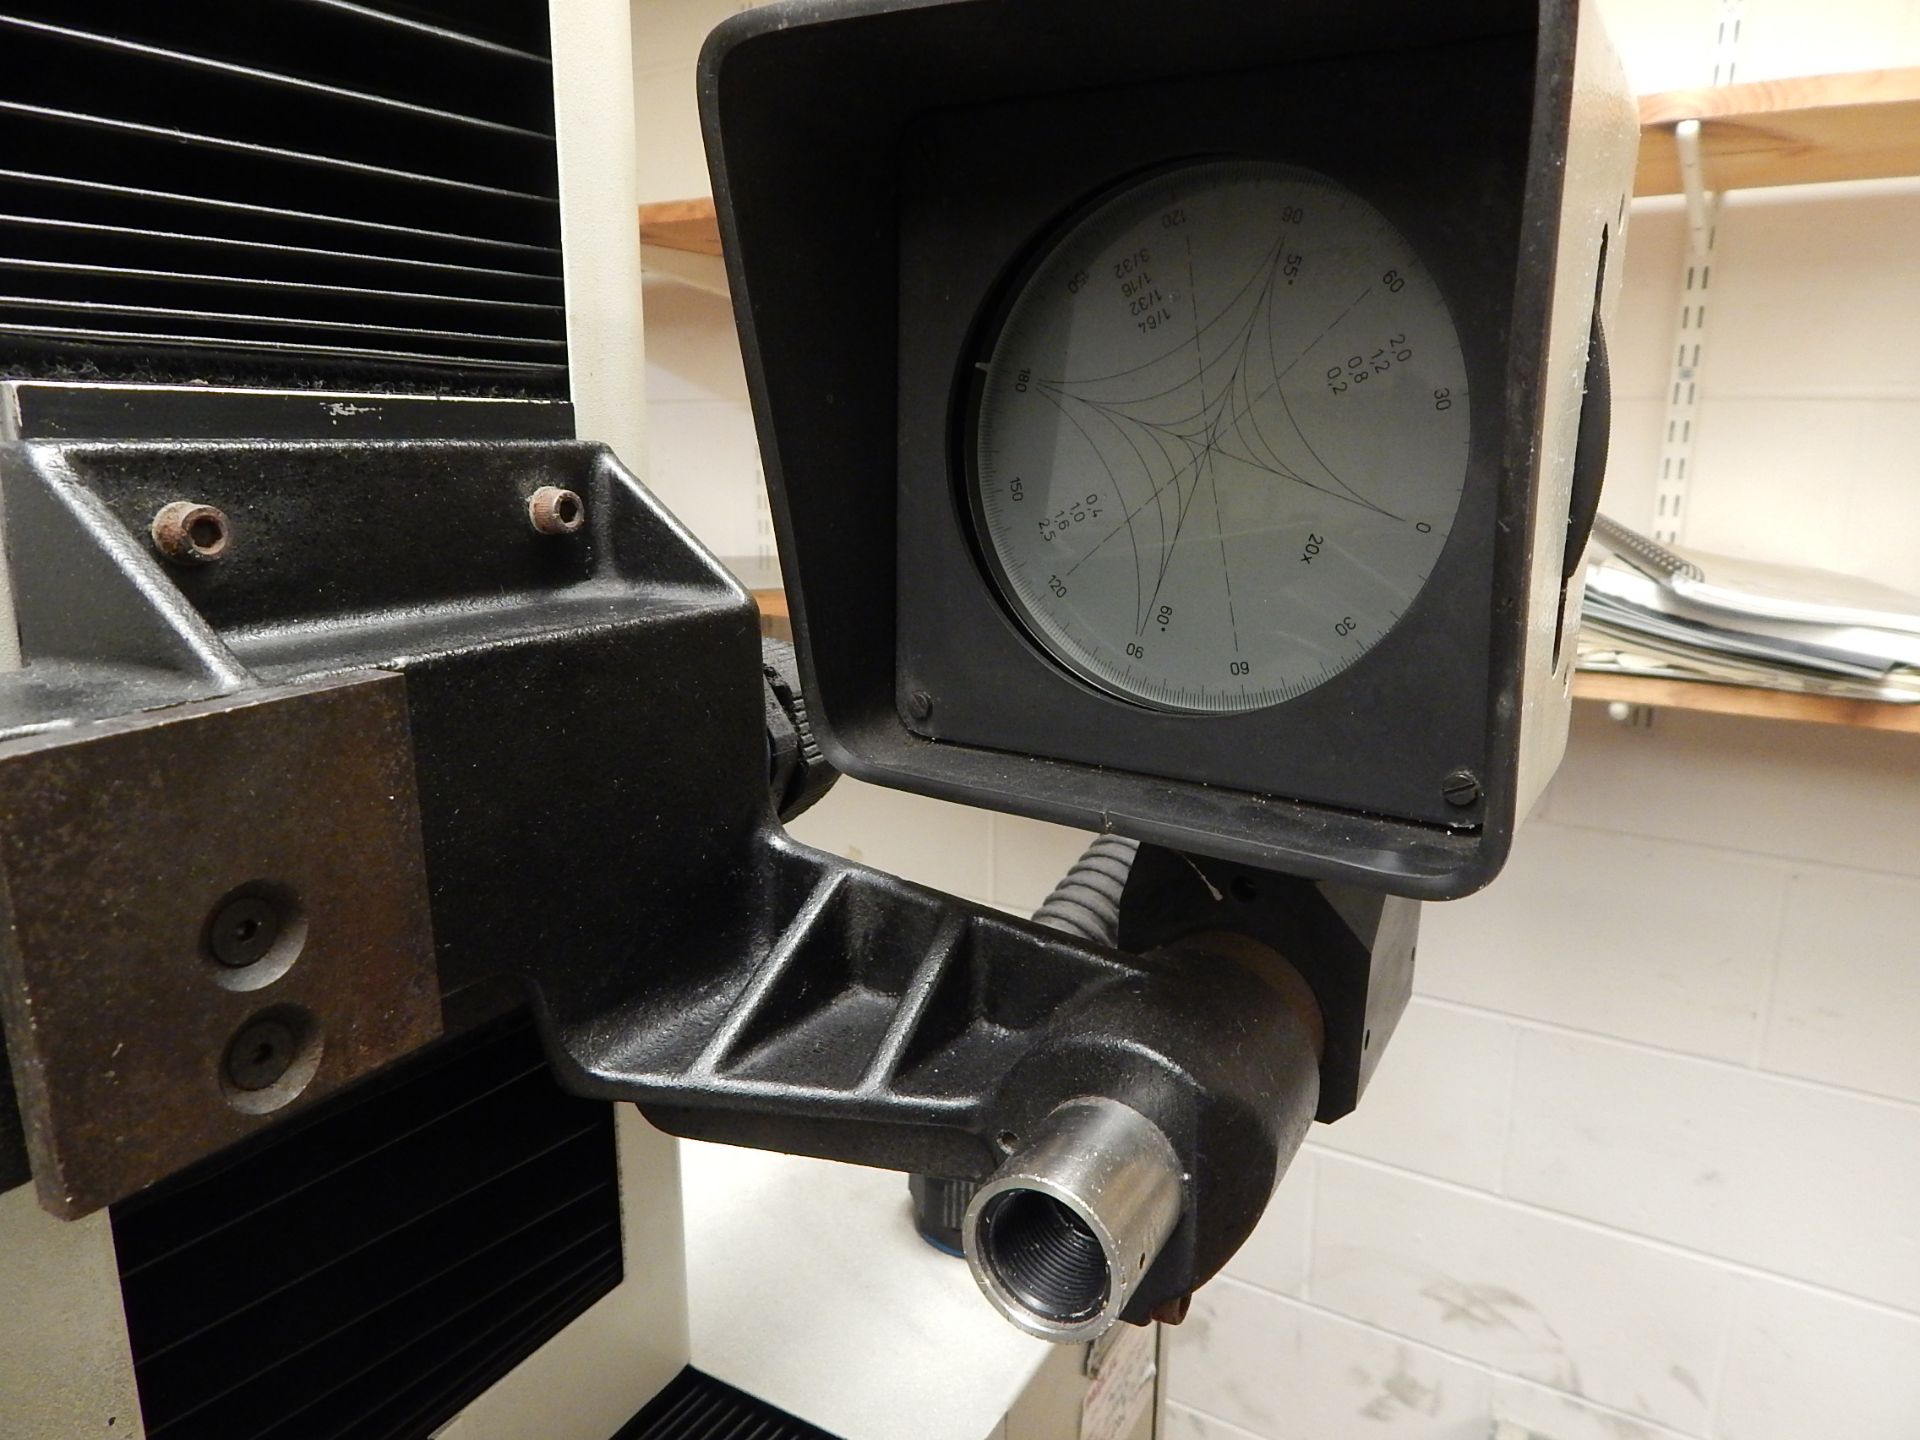 Parlec Model 240 Tool Setter, s/n 115257-0296, with Parlec Parset Master Control - Image 3 of 5